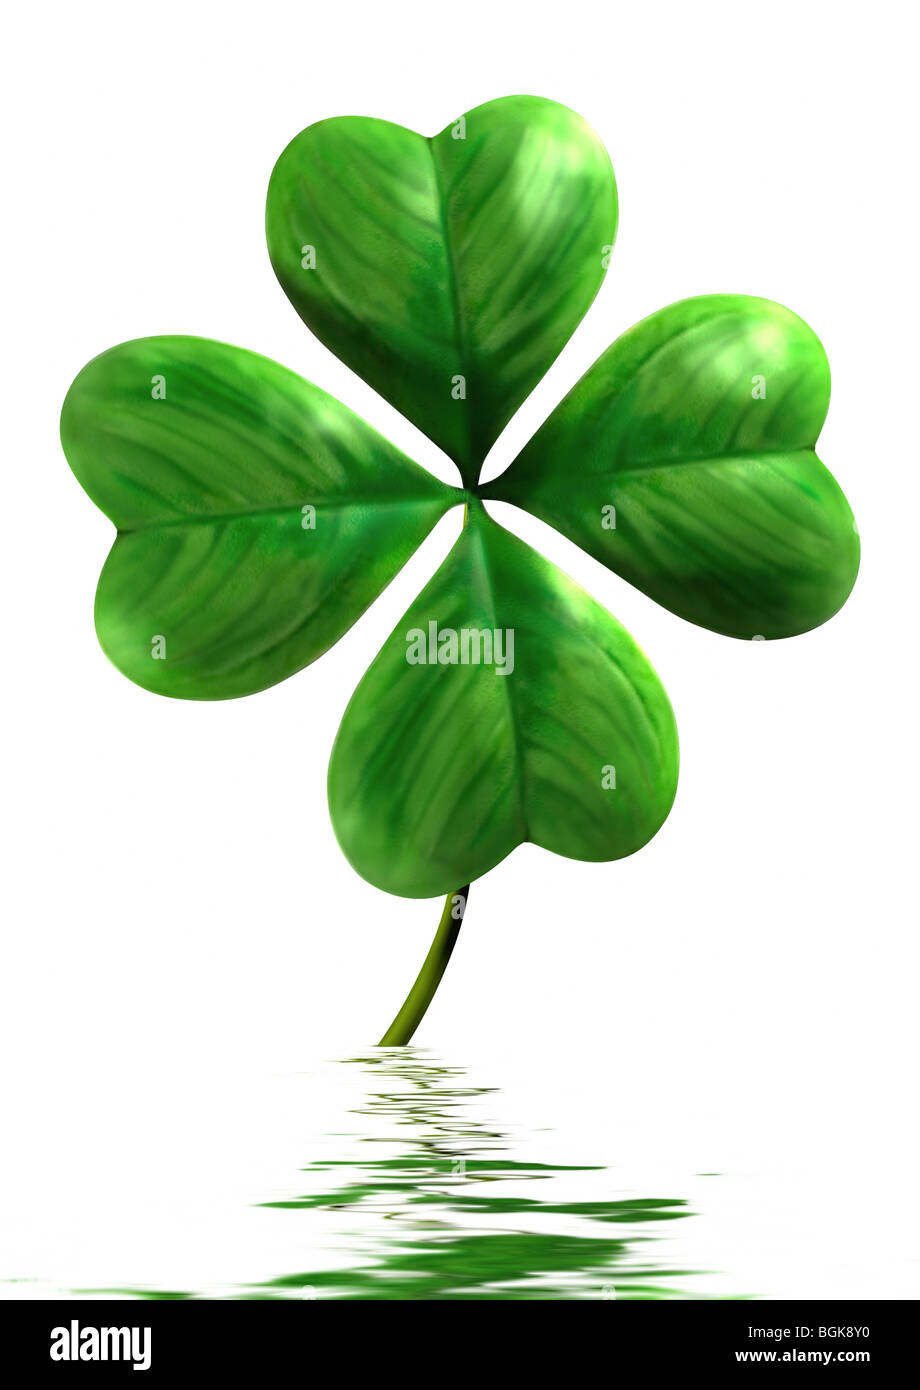 Four-leafed shamrock with reflection in water Symbol of luck and Saint Patrick Day holiday Isolated on white background Stock Photo